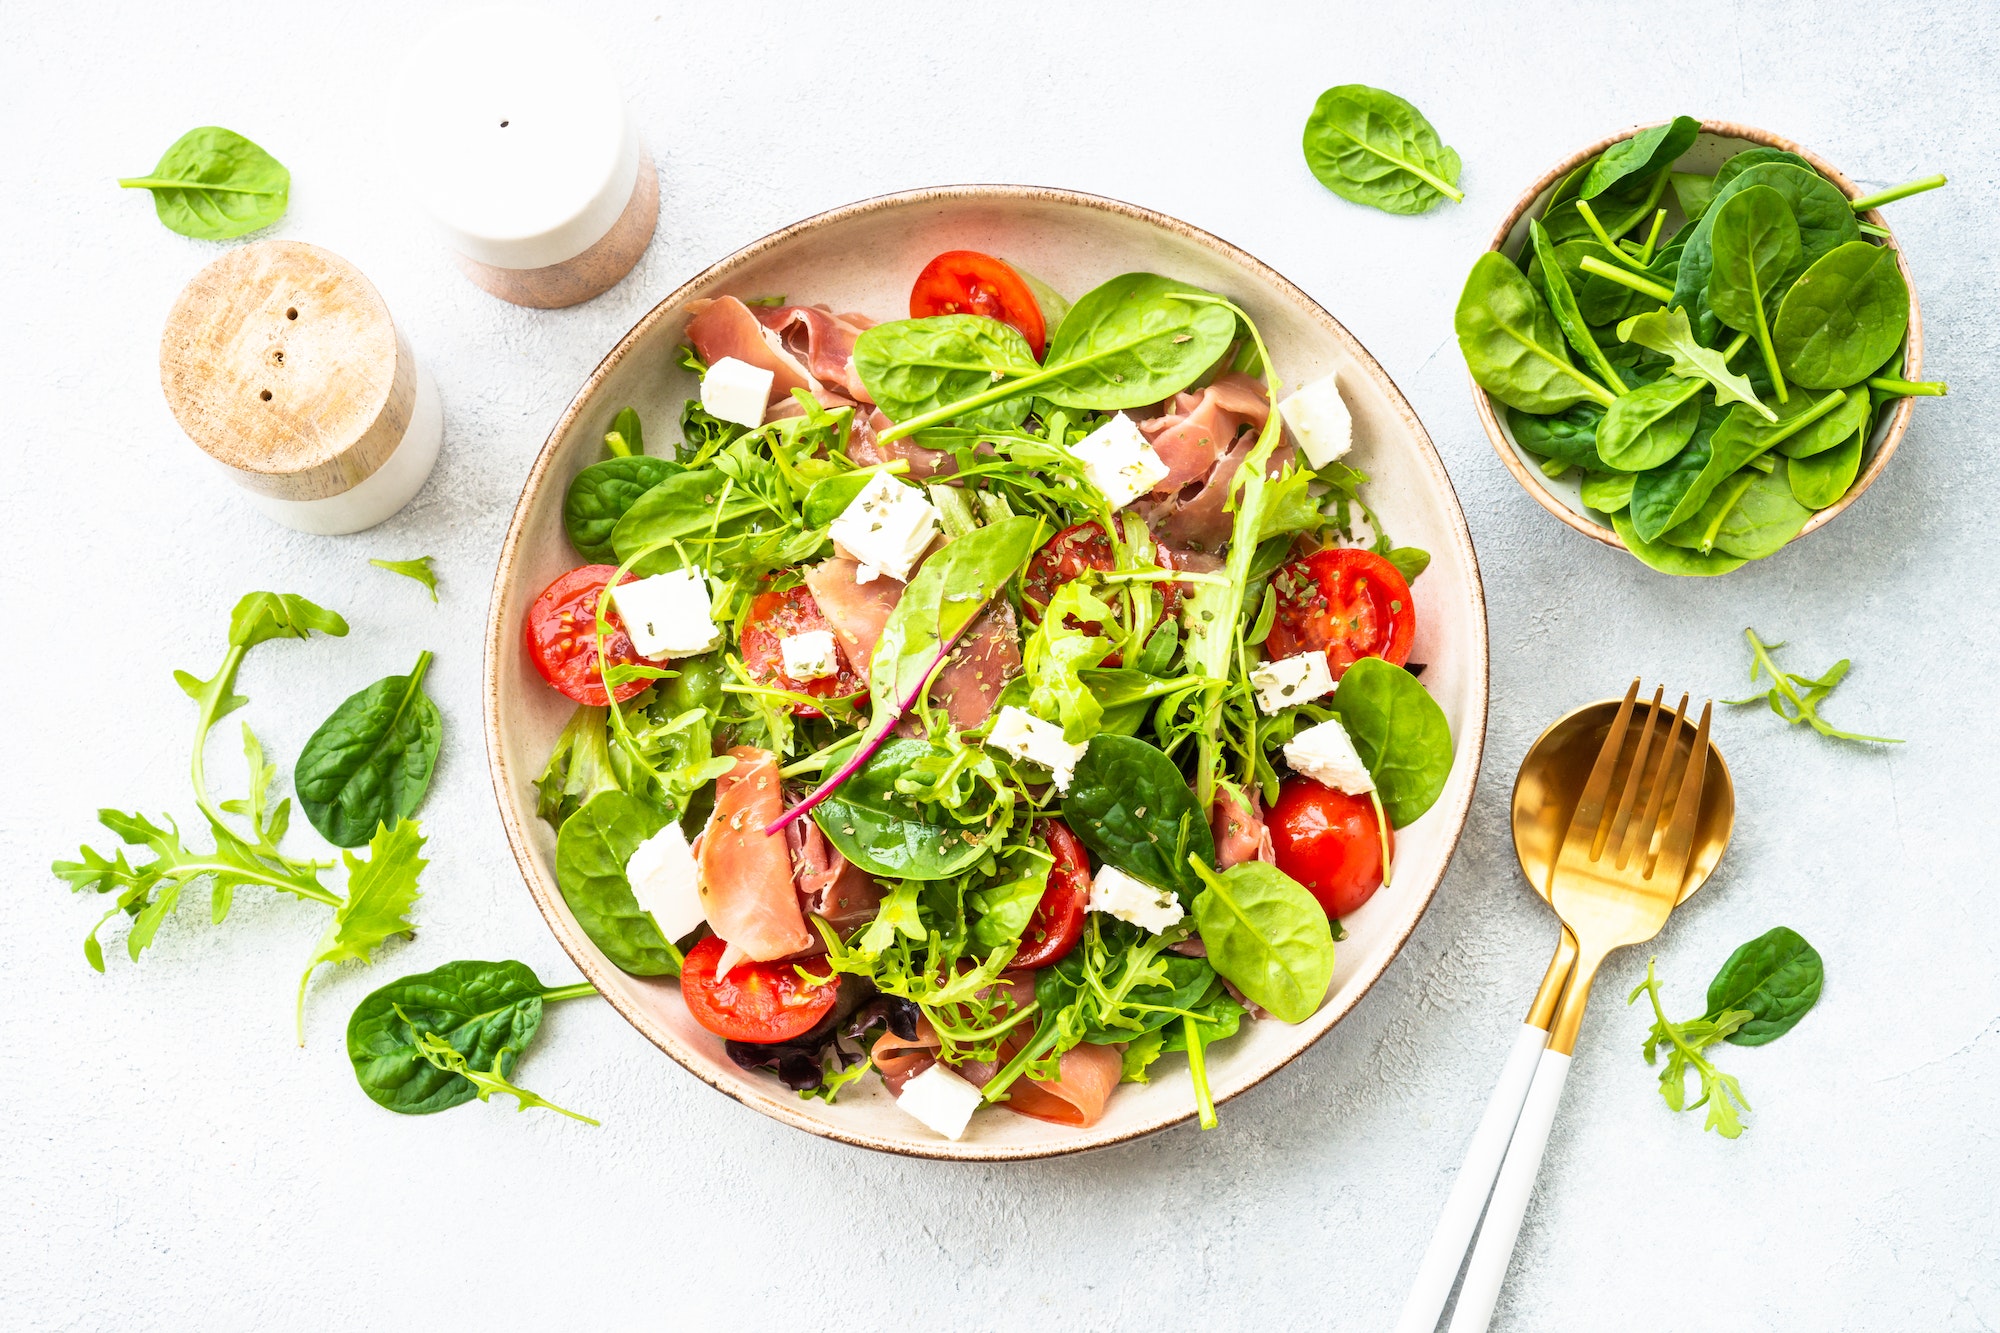 Healthy salad with green leaves, tomatoes and jamon.